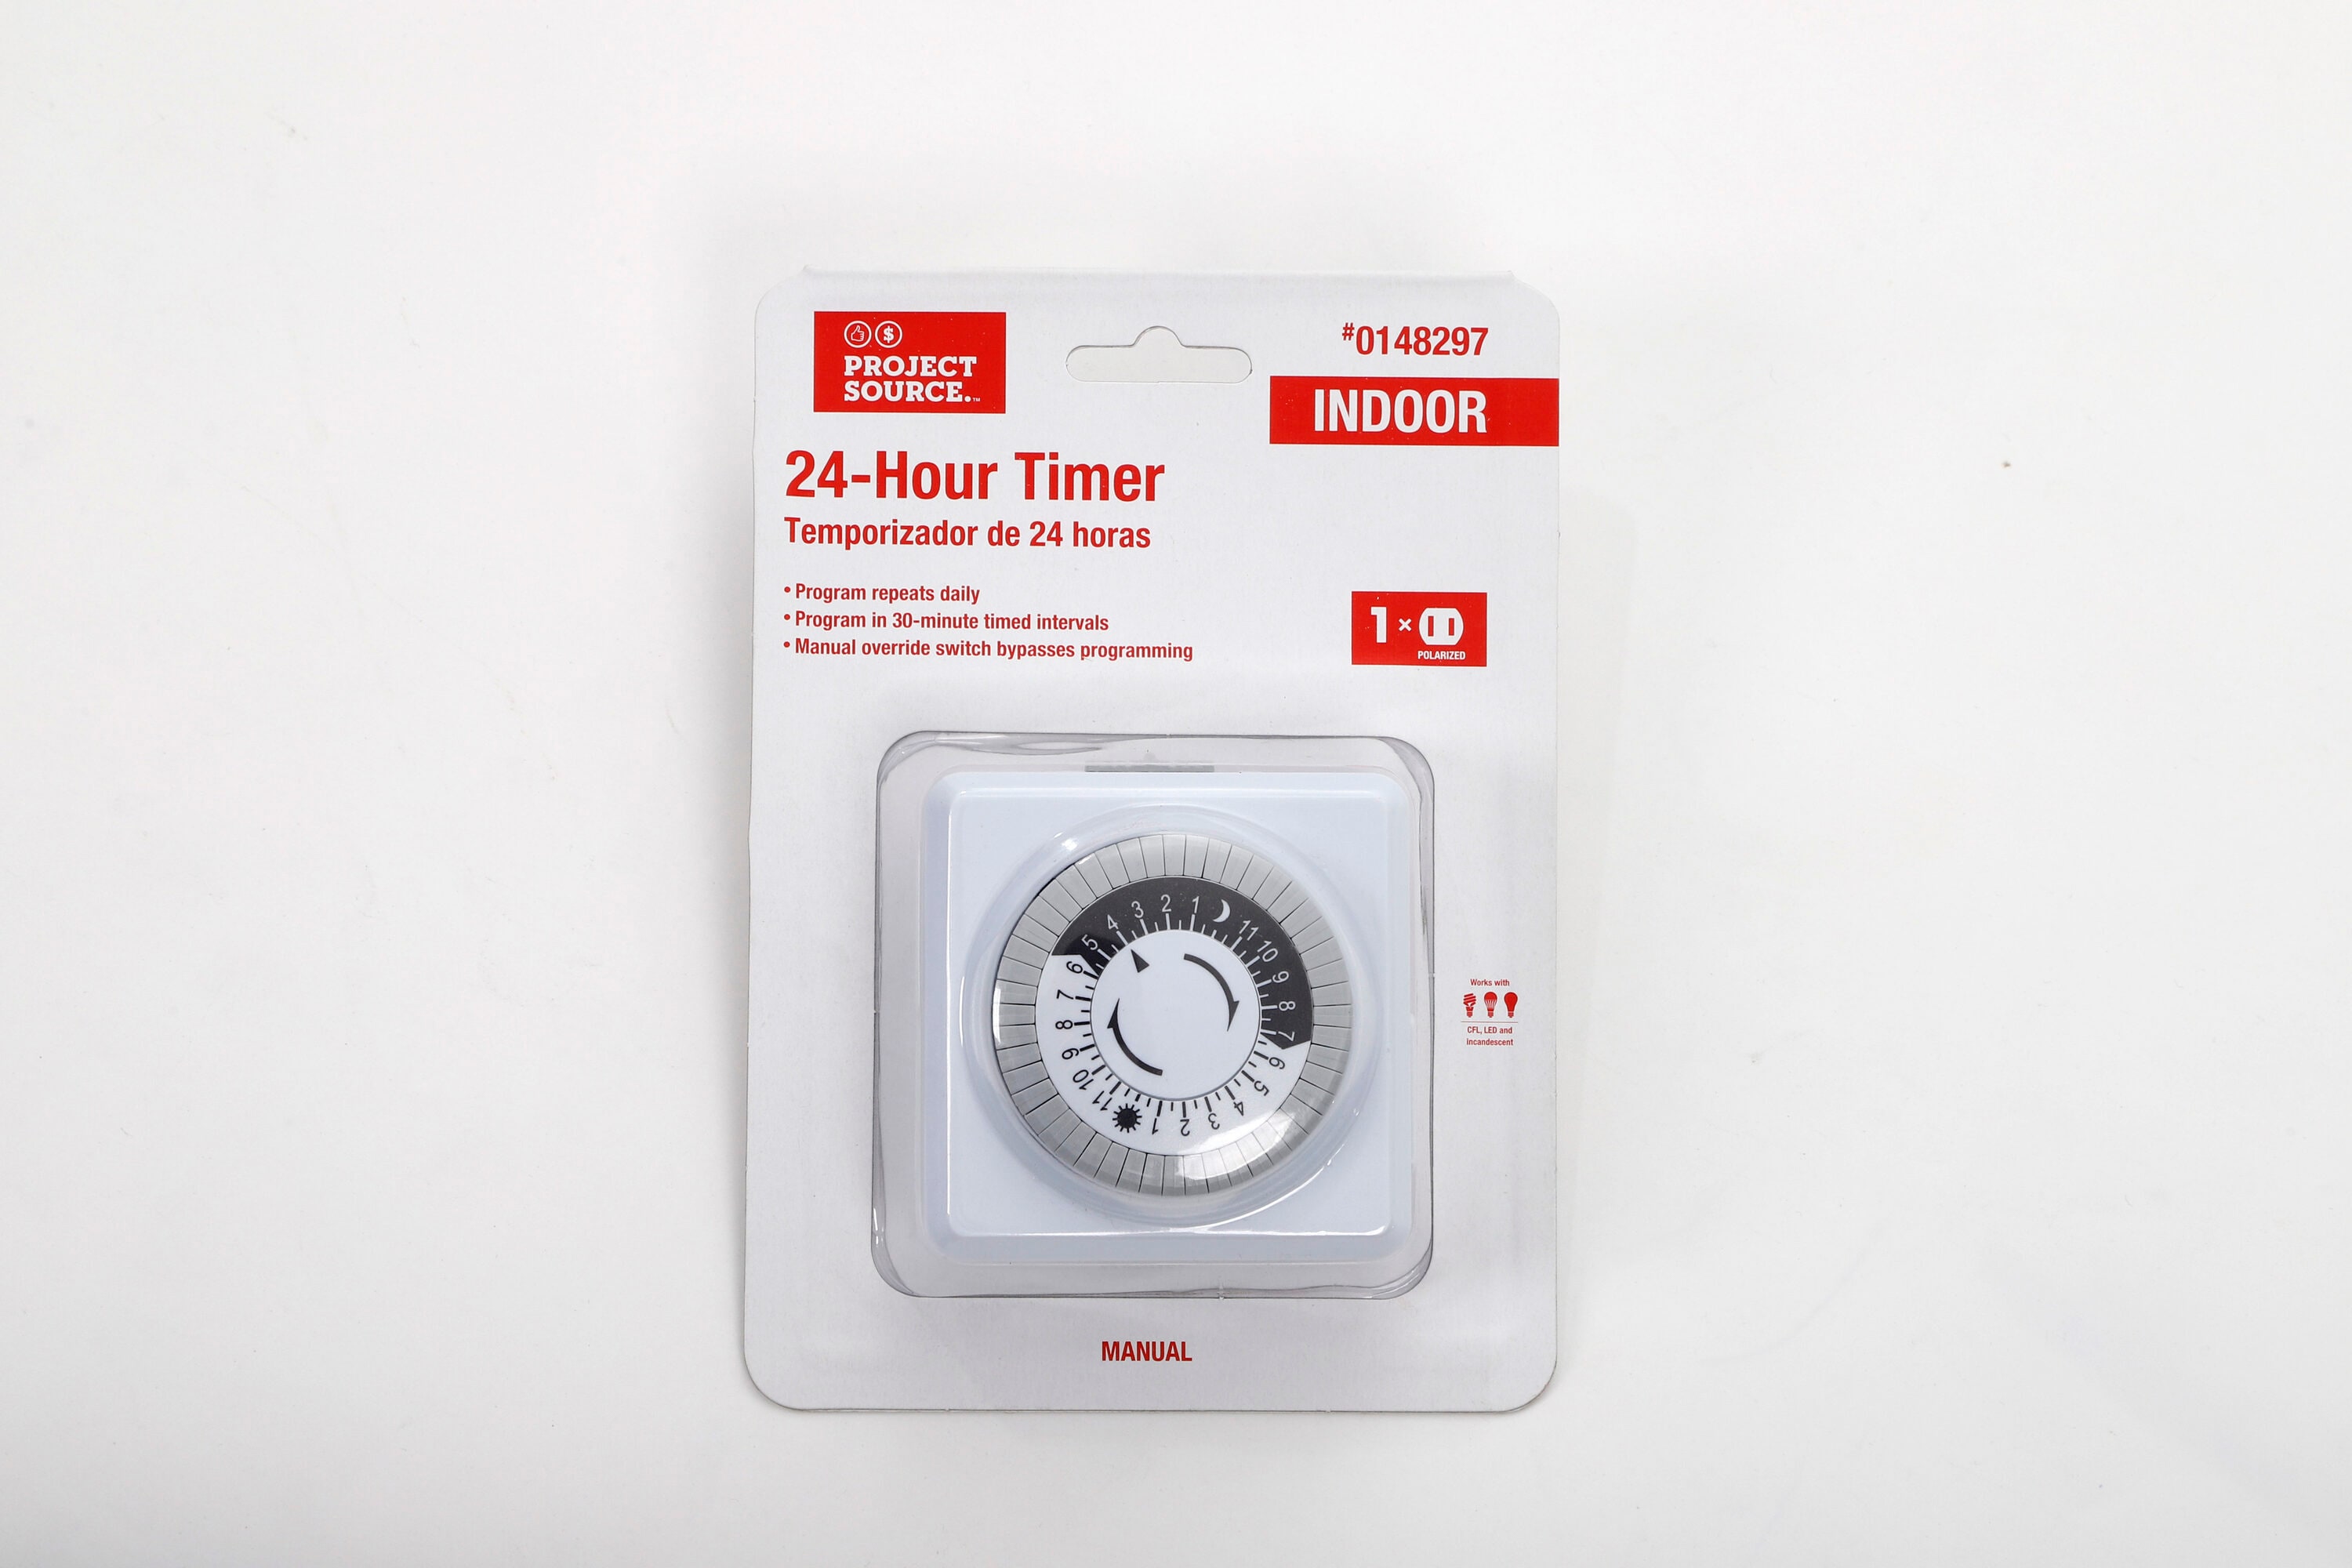 Flash Sale: ThermoWorks Timer Sale – 25% Off!